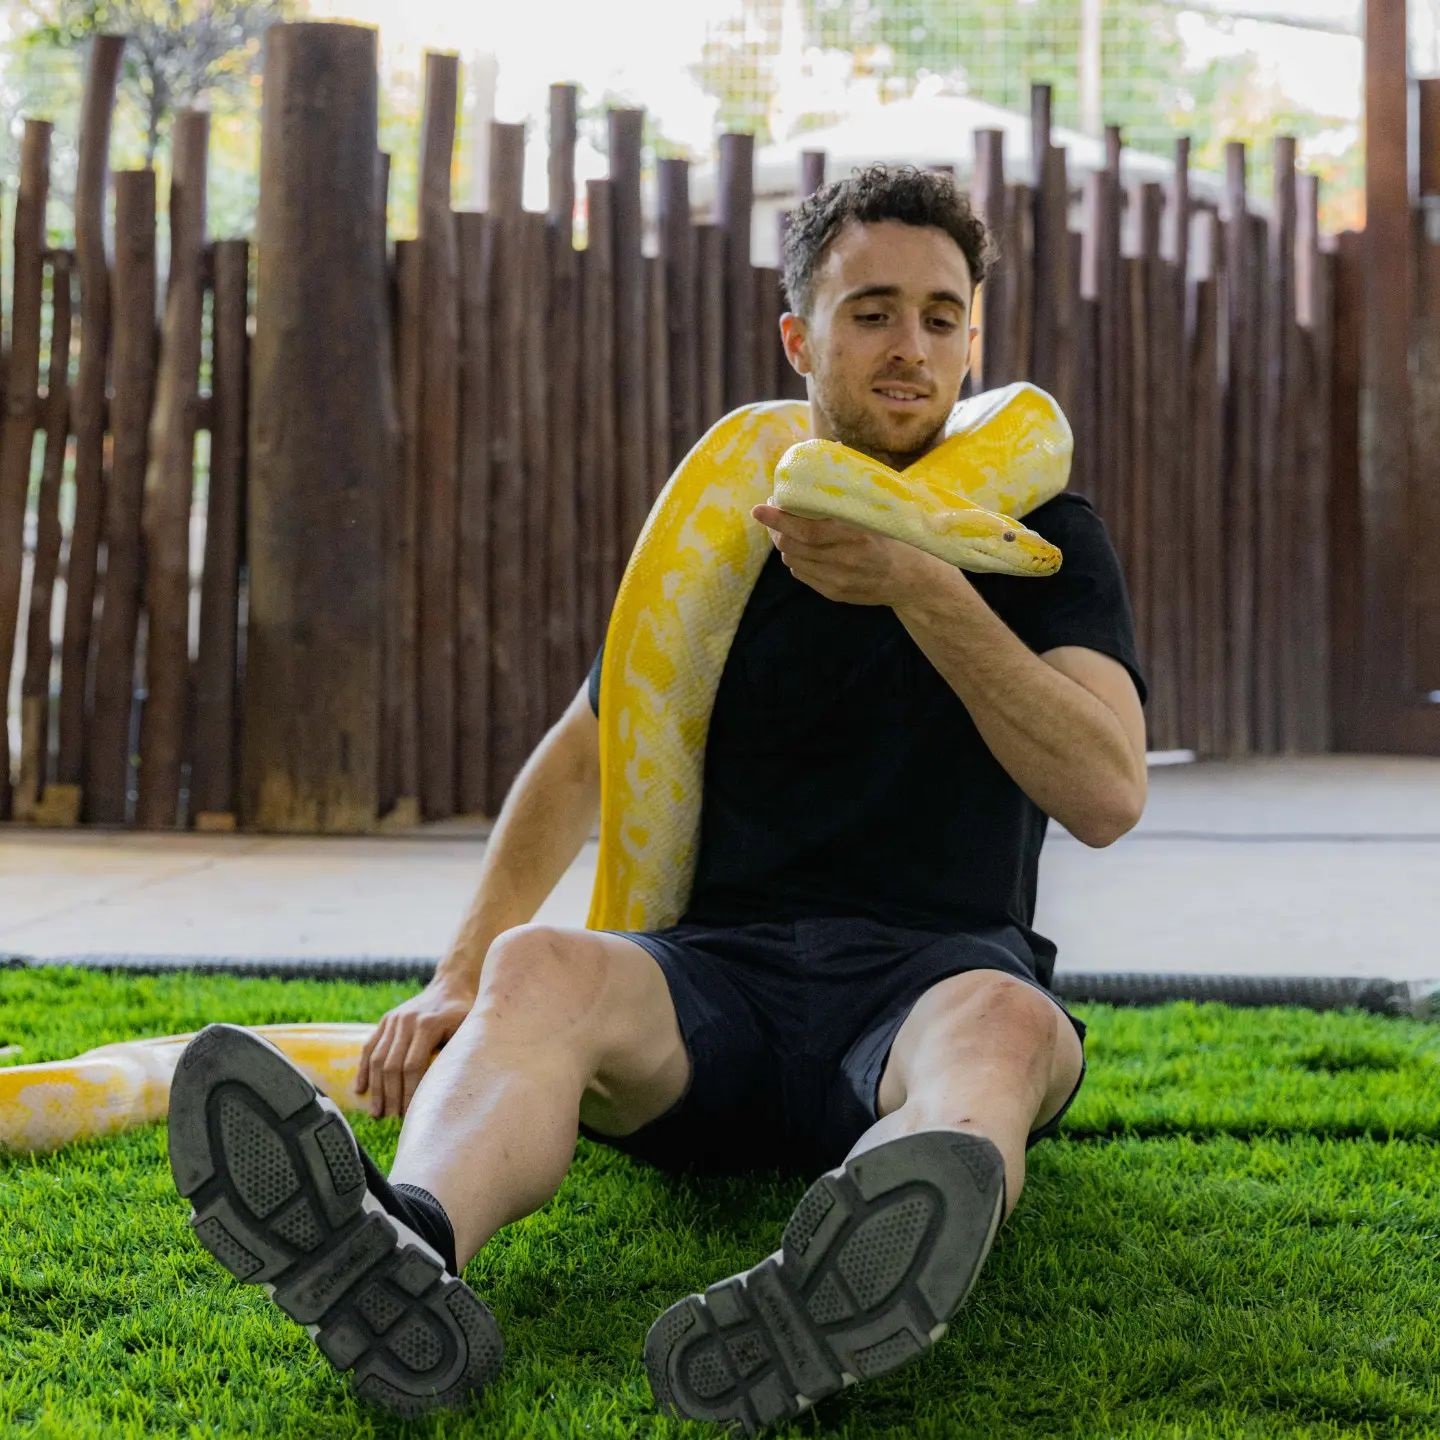 Jota risked it all by wrapping an enormous snake around his neck